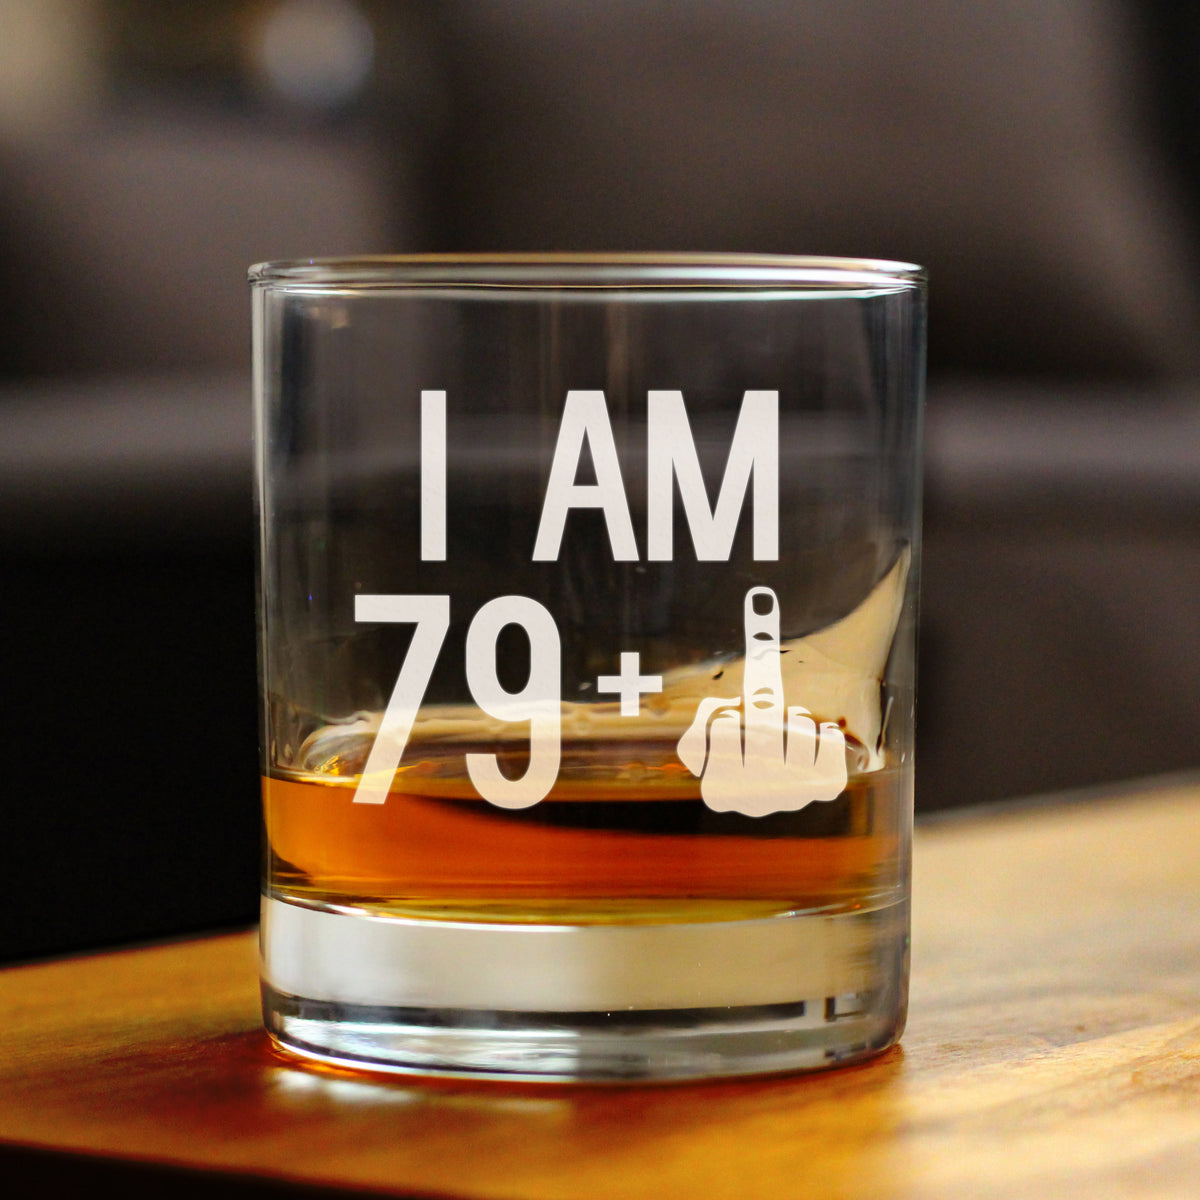 79 + 1 Middle Finger - Funny 80th Birthday Whiskey Rocks Glass Gifts for Men &amp; Women Turning 80 - Fun Whisky Drinking Tumbler